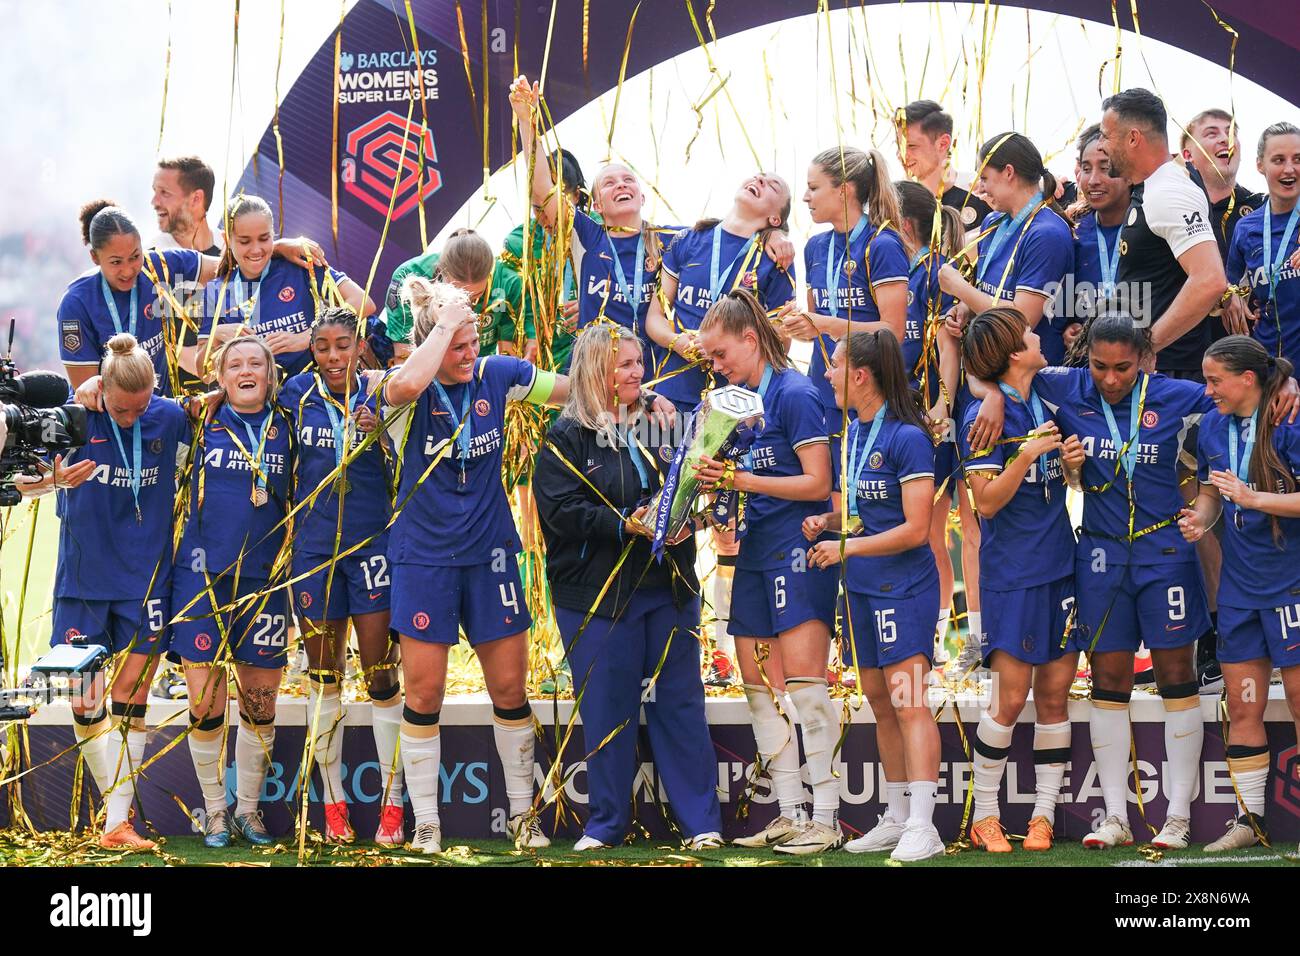 Manchester United Women v Chelsea Women Women’s Super League. 18.5.24  Old Trafford. ENGLAND - May 18.4.24 The Chelsea Women’s Team celebrate after winning the Women’s Super League  during the Women’s Super League match between Manchester United and Chelsea at Old Trafford Manchester on May 18 2024 in Manchester England. Stock Photo